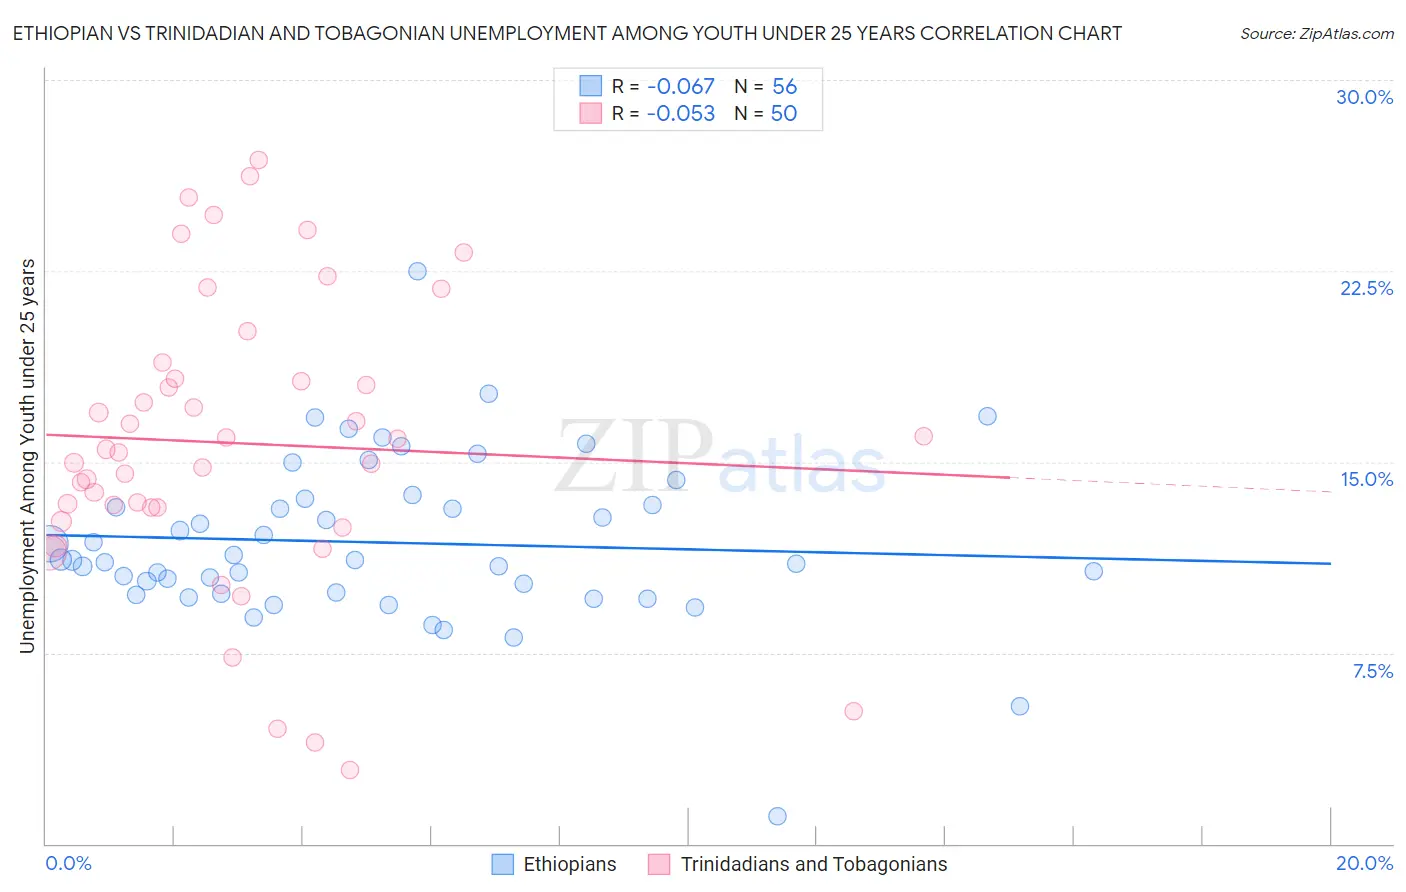 Ethiopian vs Trinidadian and Tobagonian Unemployment Among Youth under 25 years